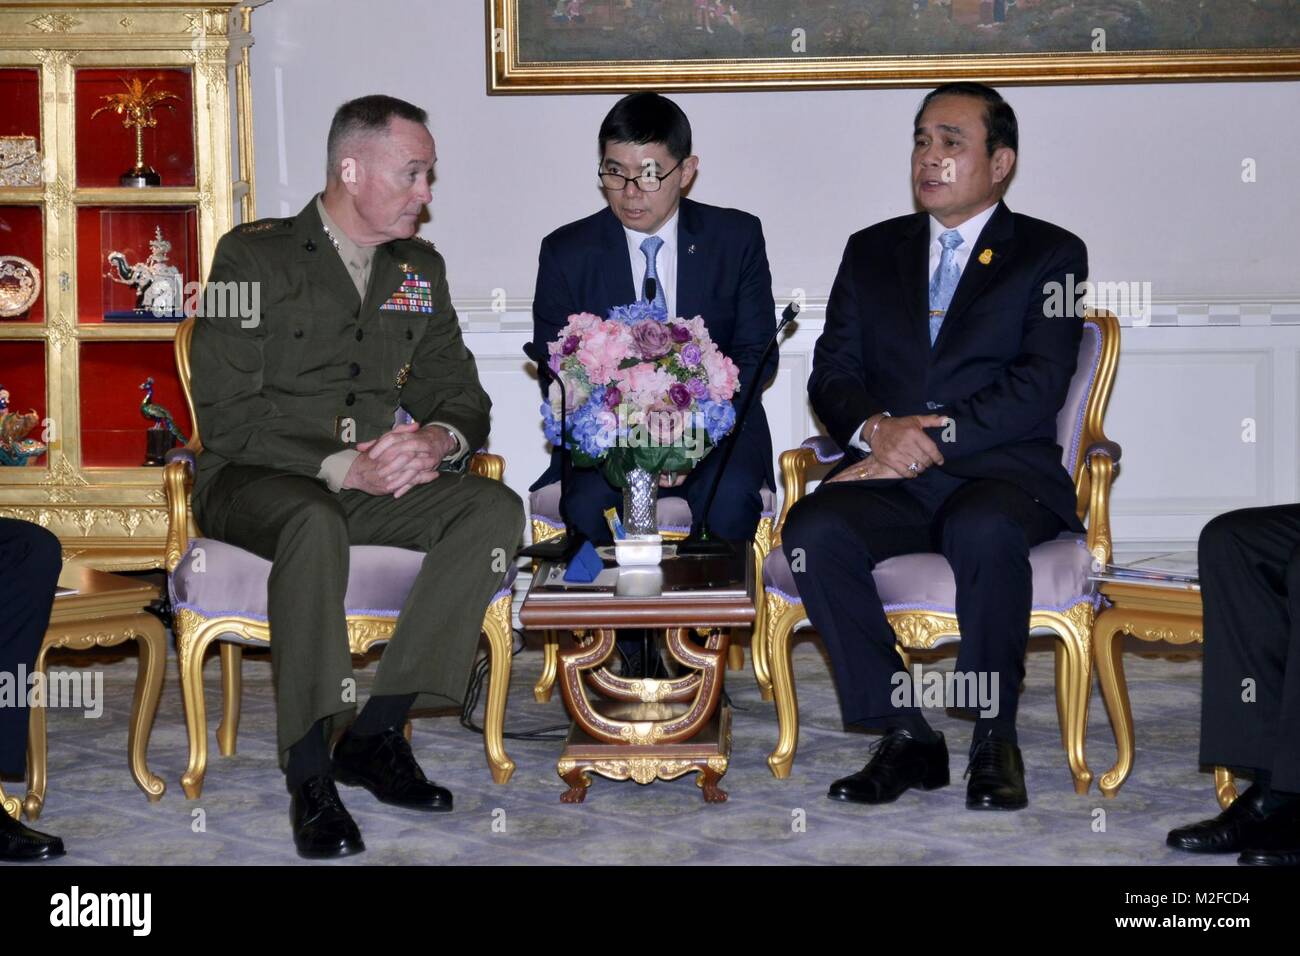 Bangkok, Thailand. 7th Feb, 2018. Thai Prime Minister Prayut Chan-o-cha (R) meets with Gen. Joseph Dunford, chairman of the U.S. Joint Chiefs of Staff, during their meeting in Bangkok, Thailand, Feb. 7, 2018. Credit: Thai Government House/Xinhua/Alamy Live News Stock Photo